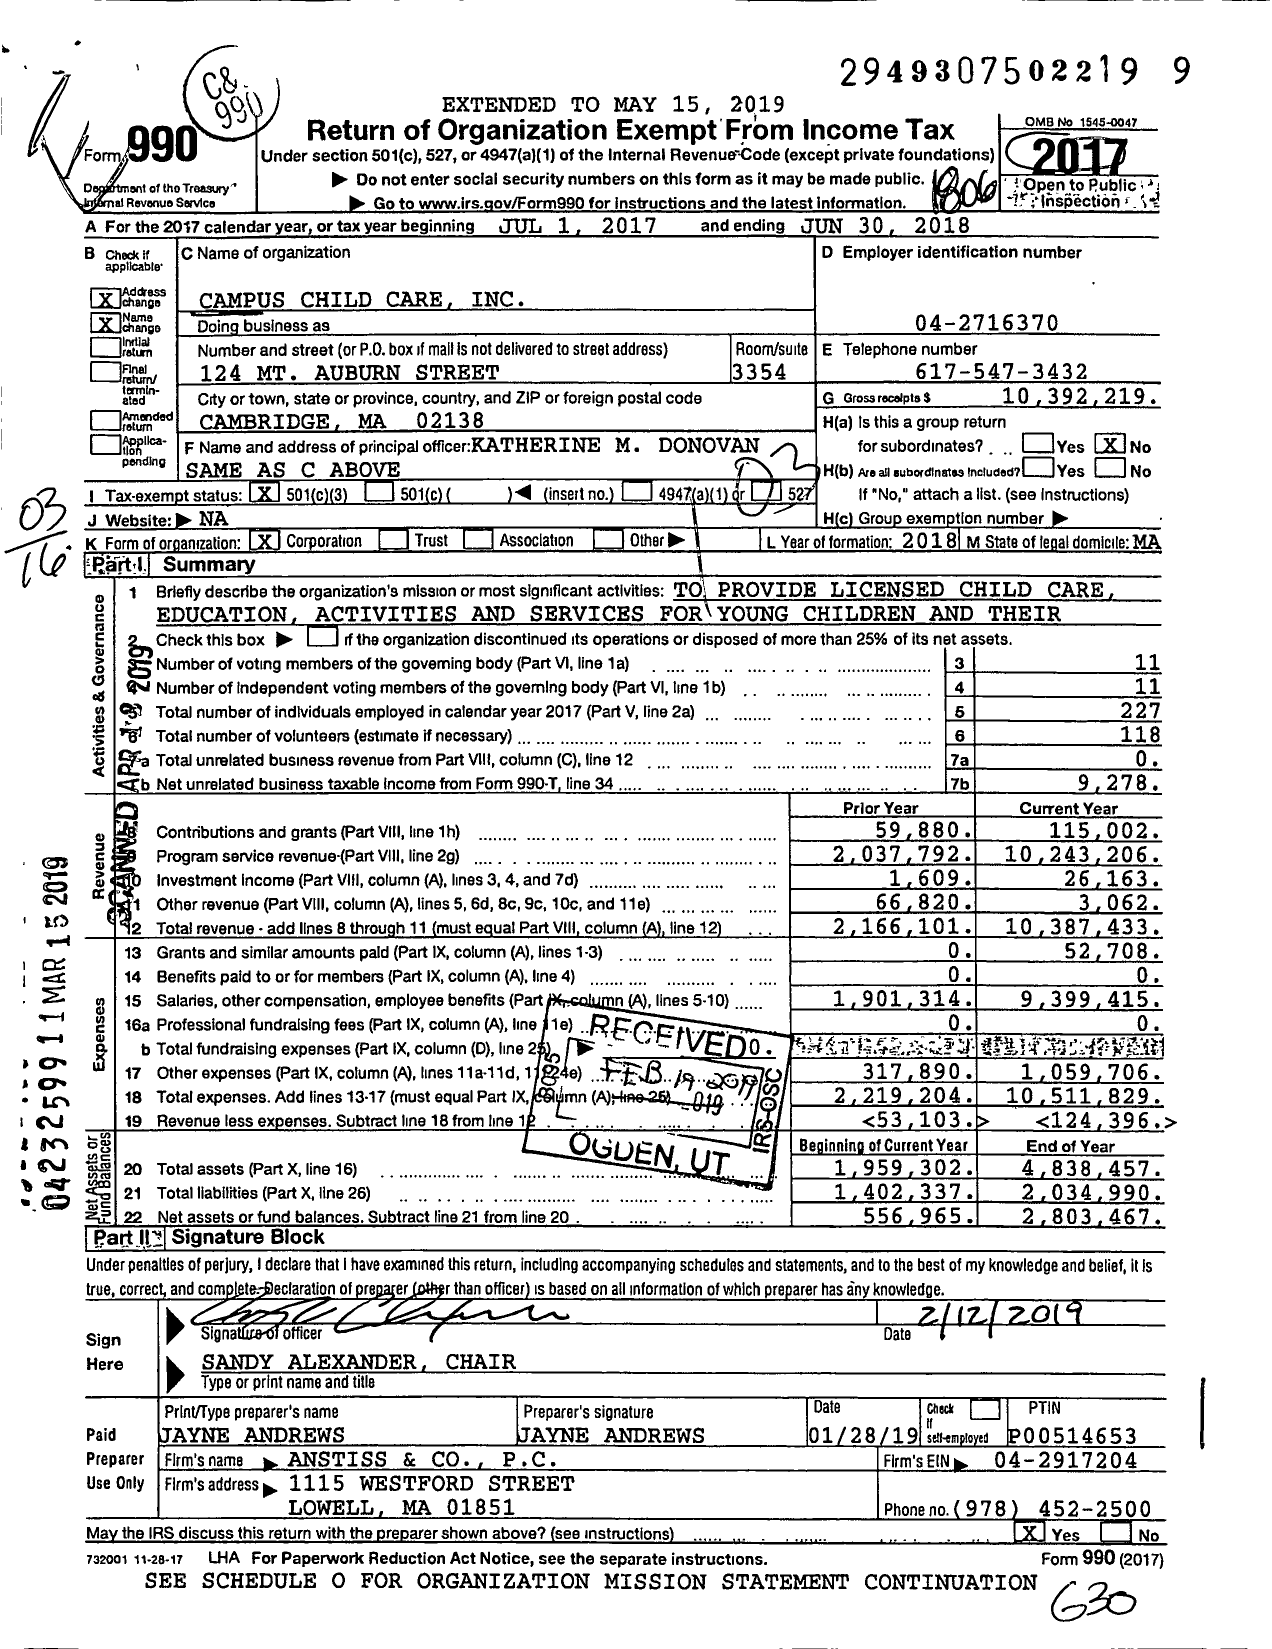 Image of first page of 2017 Form 990 for Campus Child Care